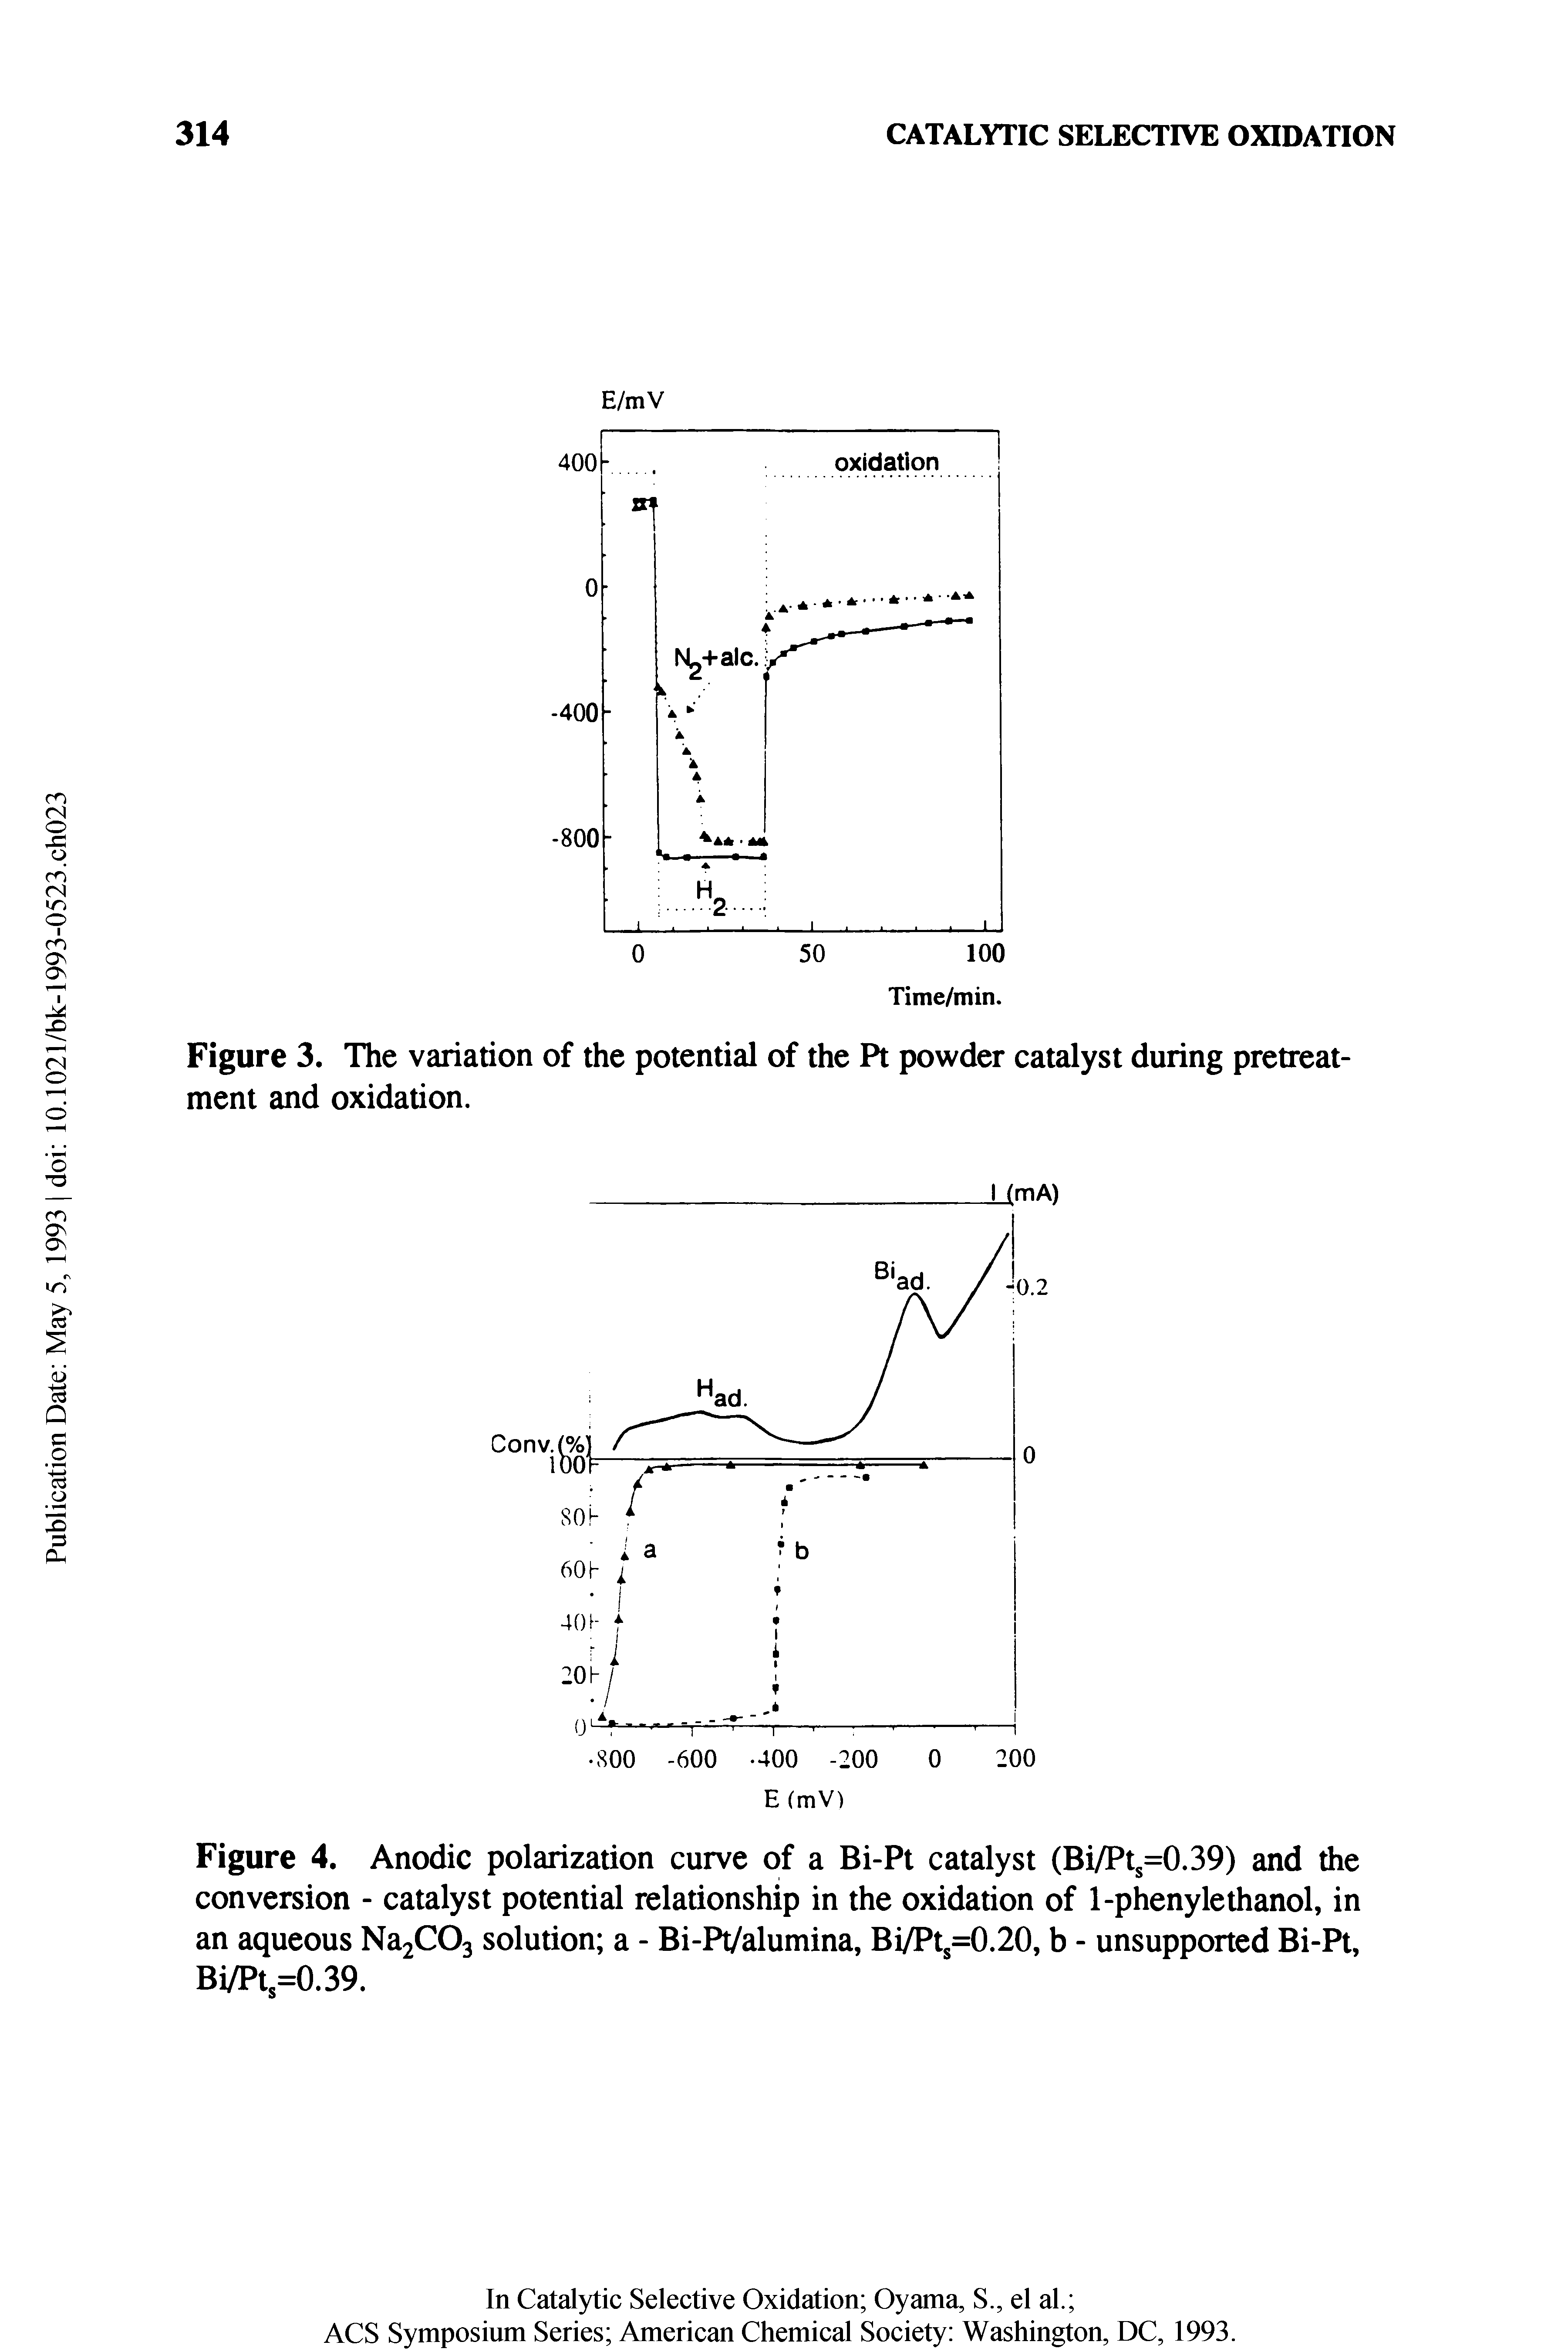 Figure 4. Anodic polarization curve of a Bi-Pt catalyst (Bi/Pts=0.39) and the conversion - catalyst potential relationship in the oxidation of 1-phenylethanol, in an aqueous Na2C03 solution a - Bi-Pt/alumina, Bi/Pts=0.20, b - unsupported Bi-Pt, Bi/Pt=0.39.